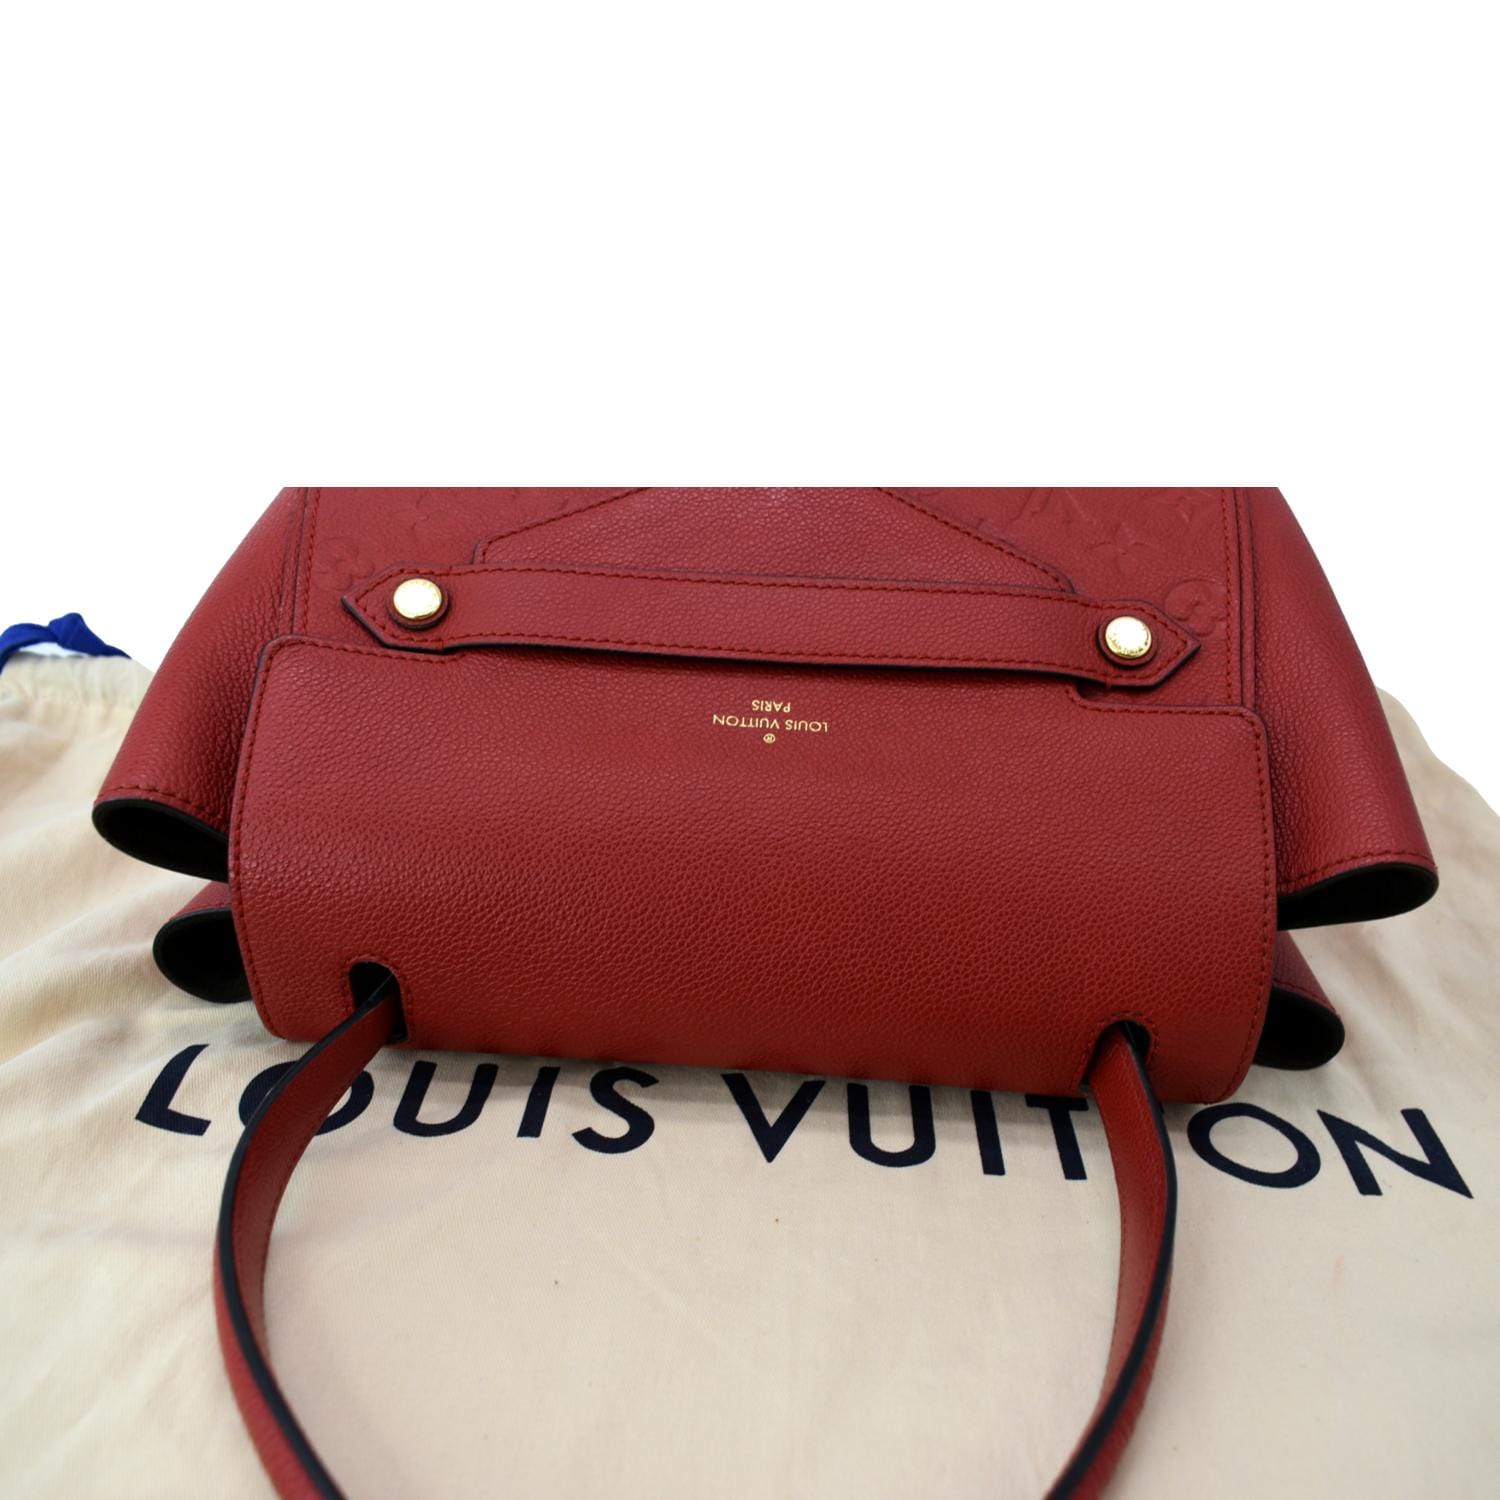 louis vuitton bag with red trim